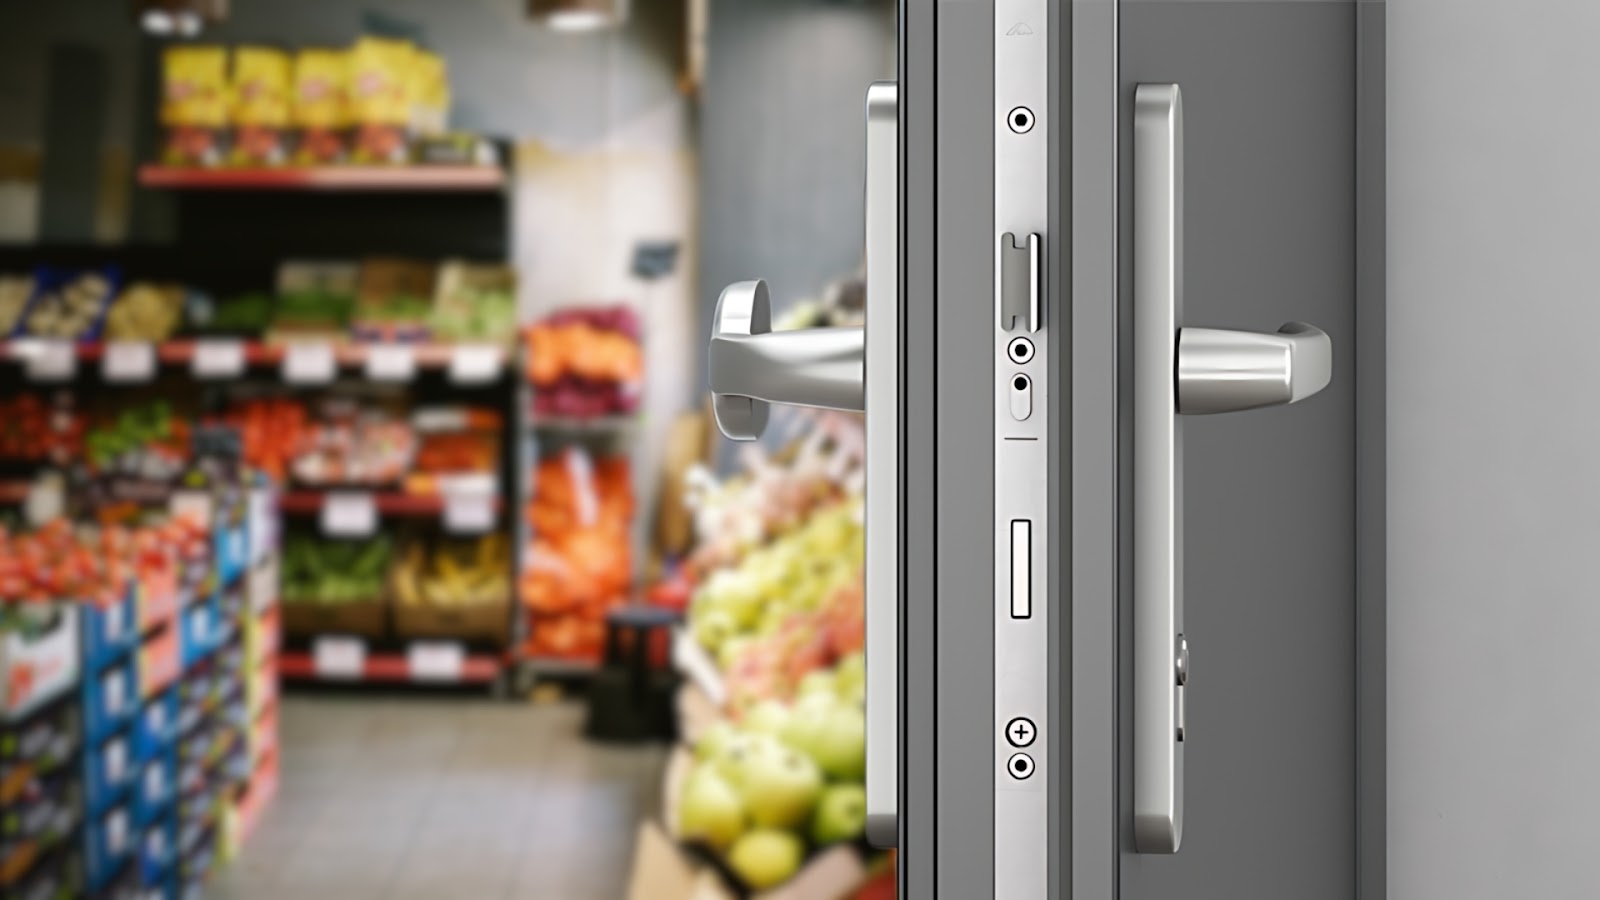 A high-security lock on a supermarket entrance ensures safe and secure shopping.